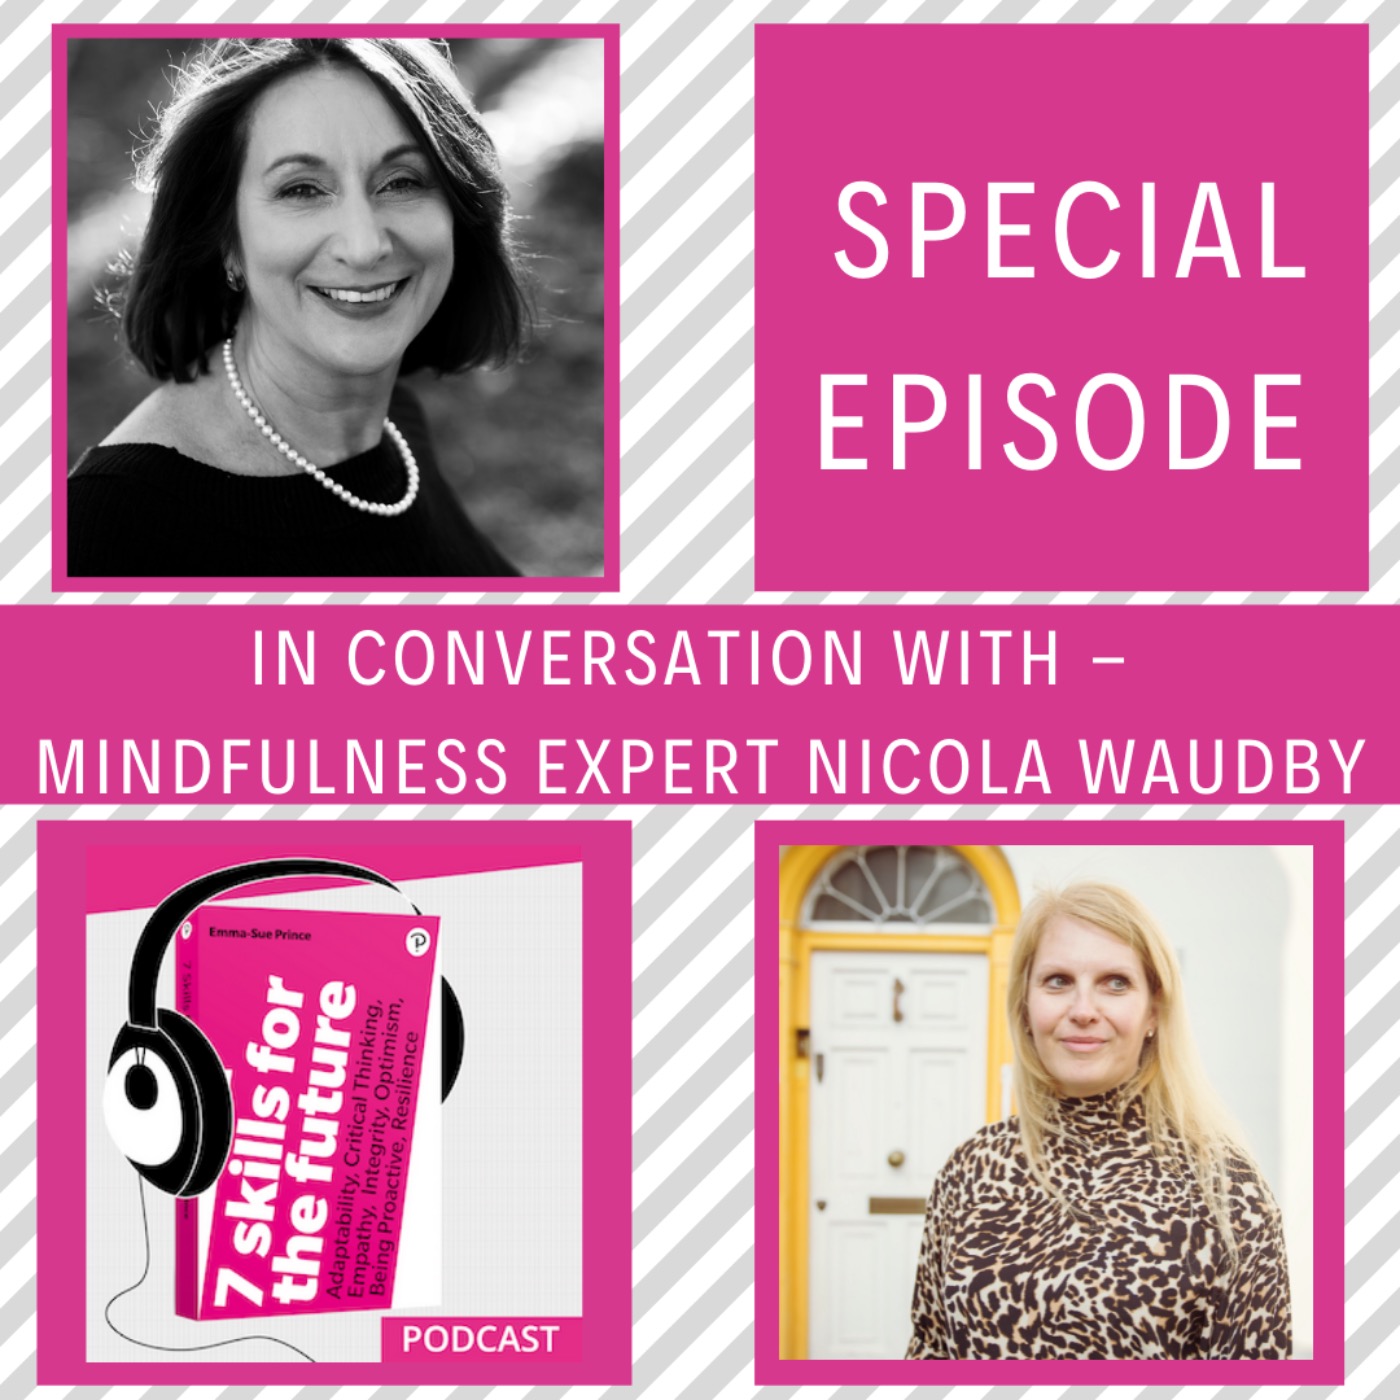 In Conversation with Mindfulness Expert Nicola Waudby